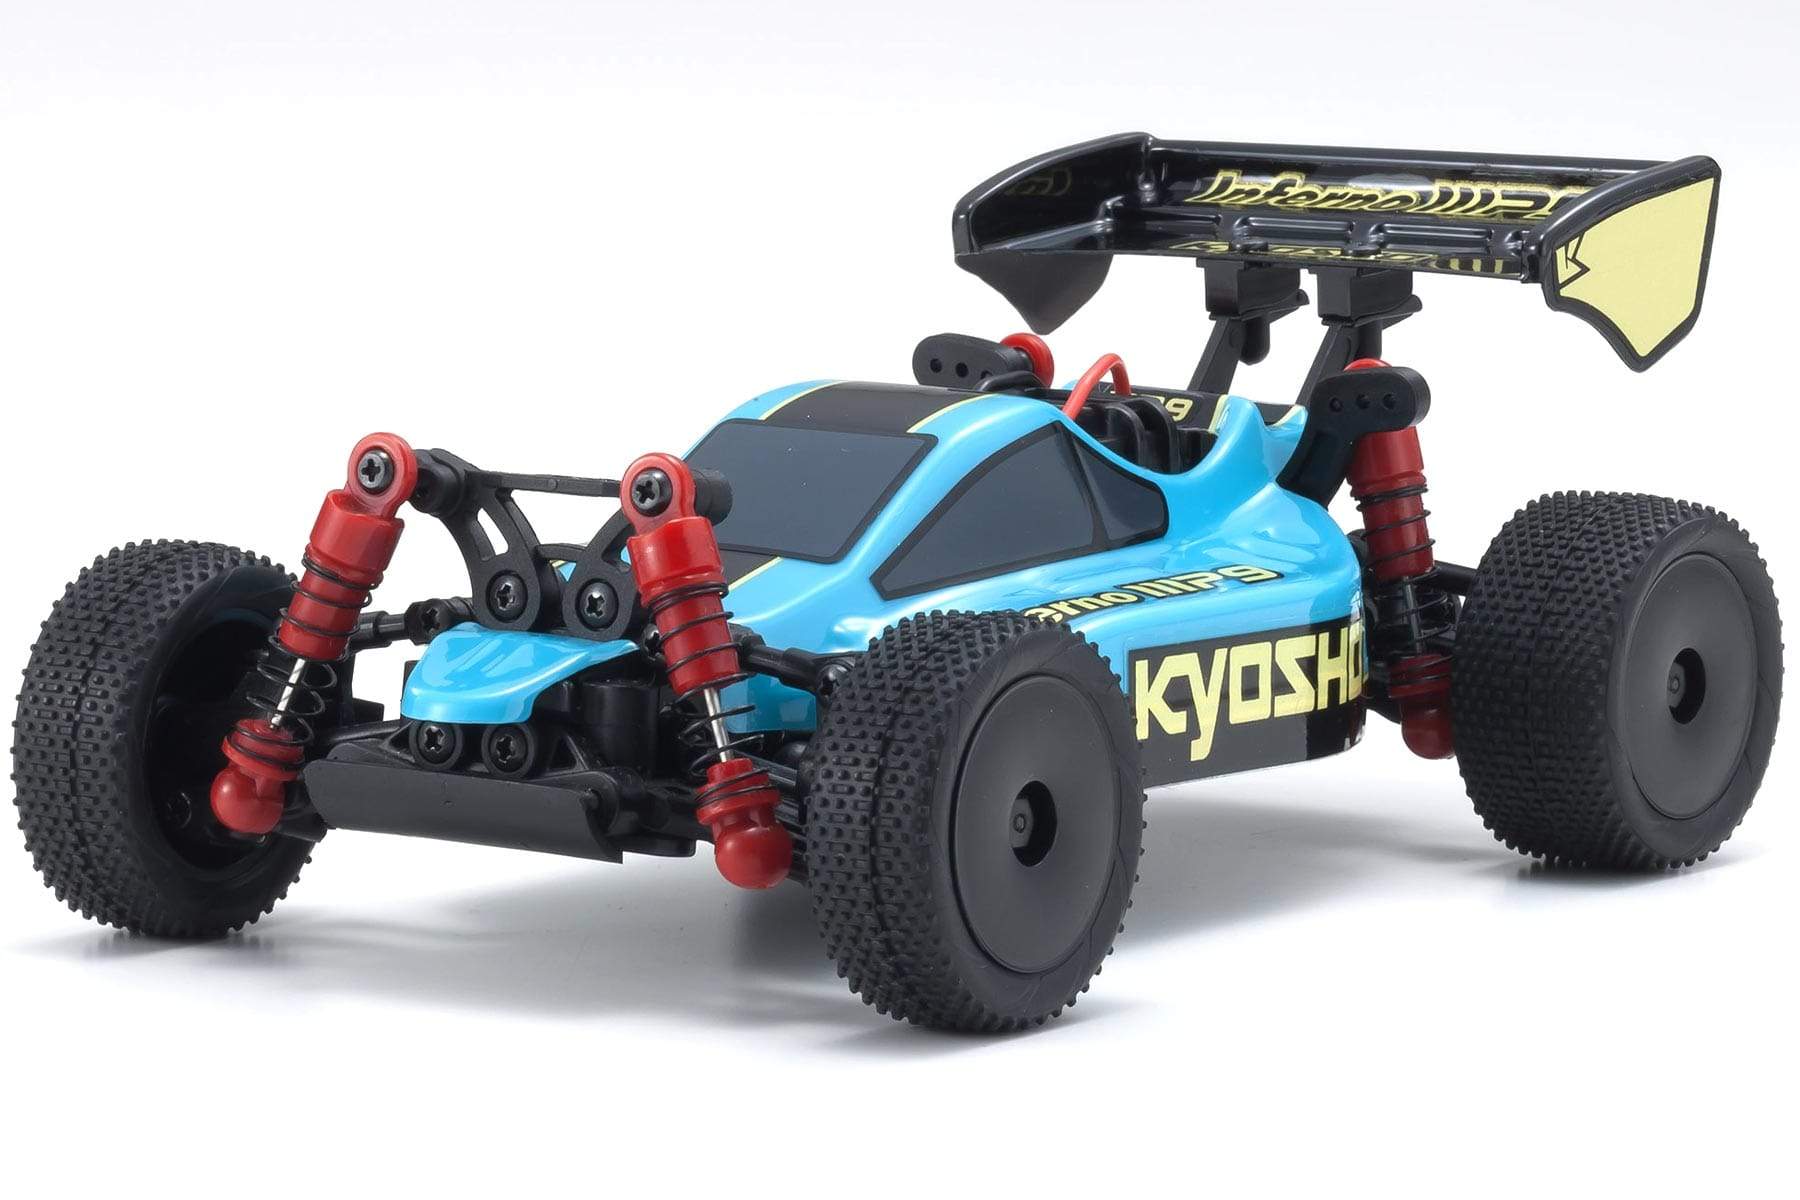 Kyosho Mini-Z MP9 Buggy - Small-Scale RC